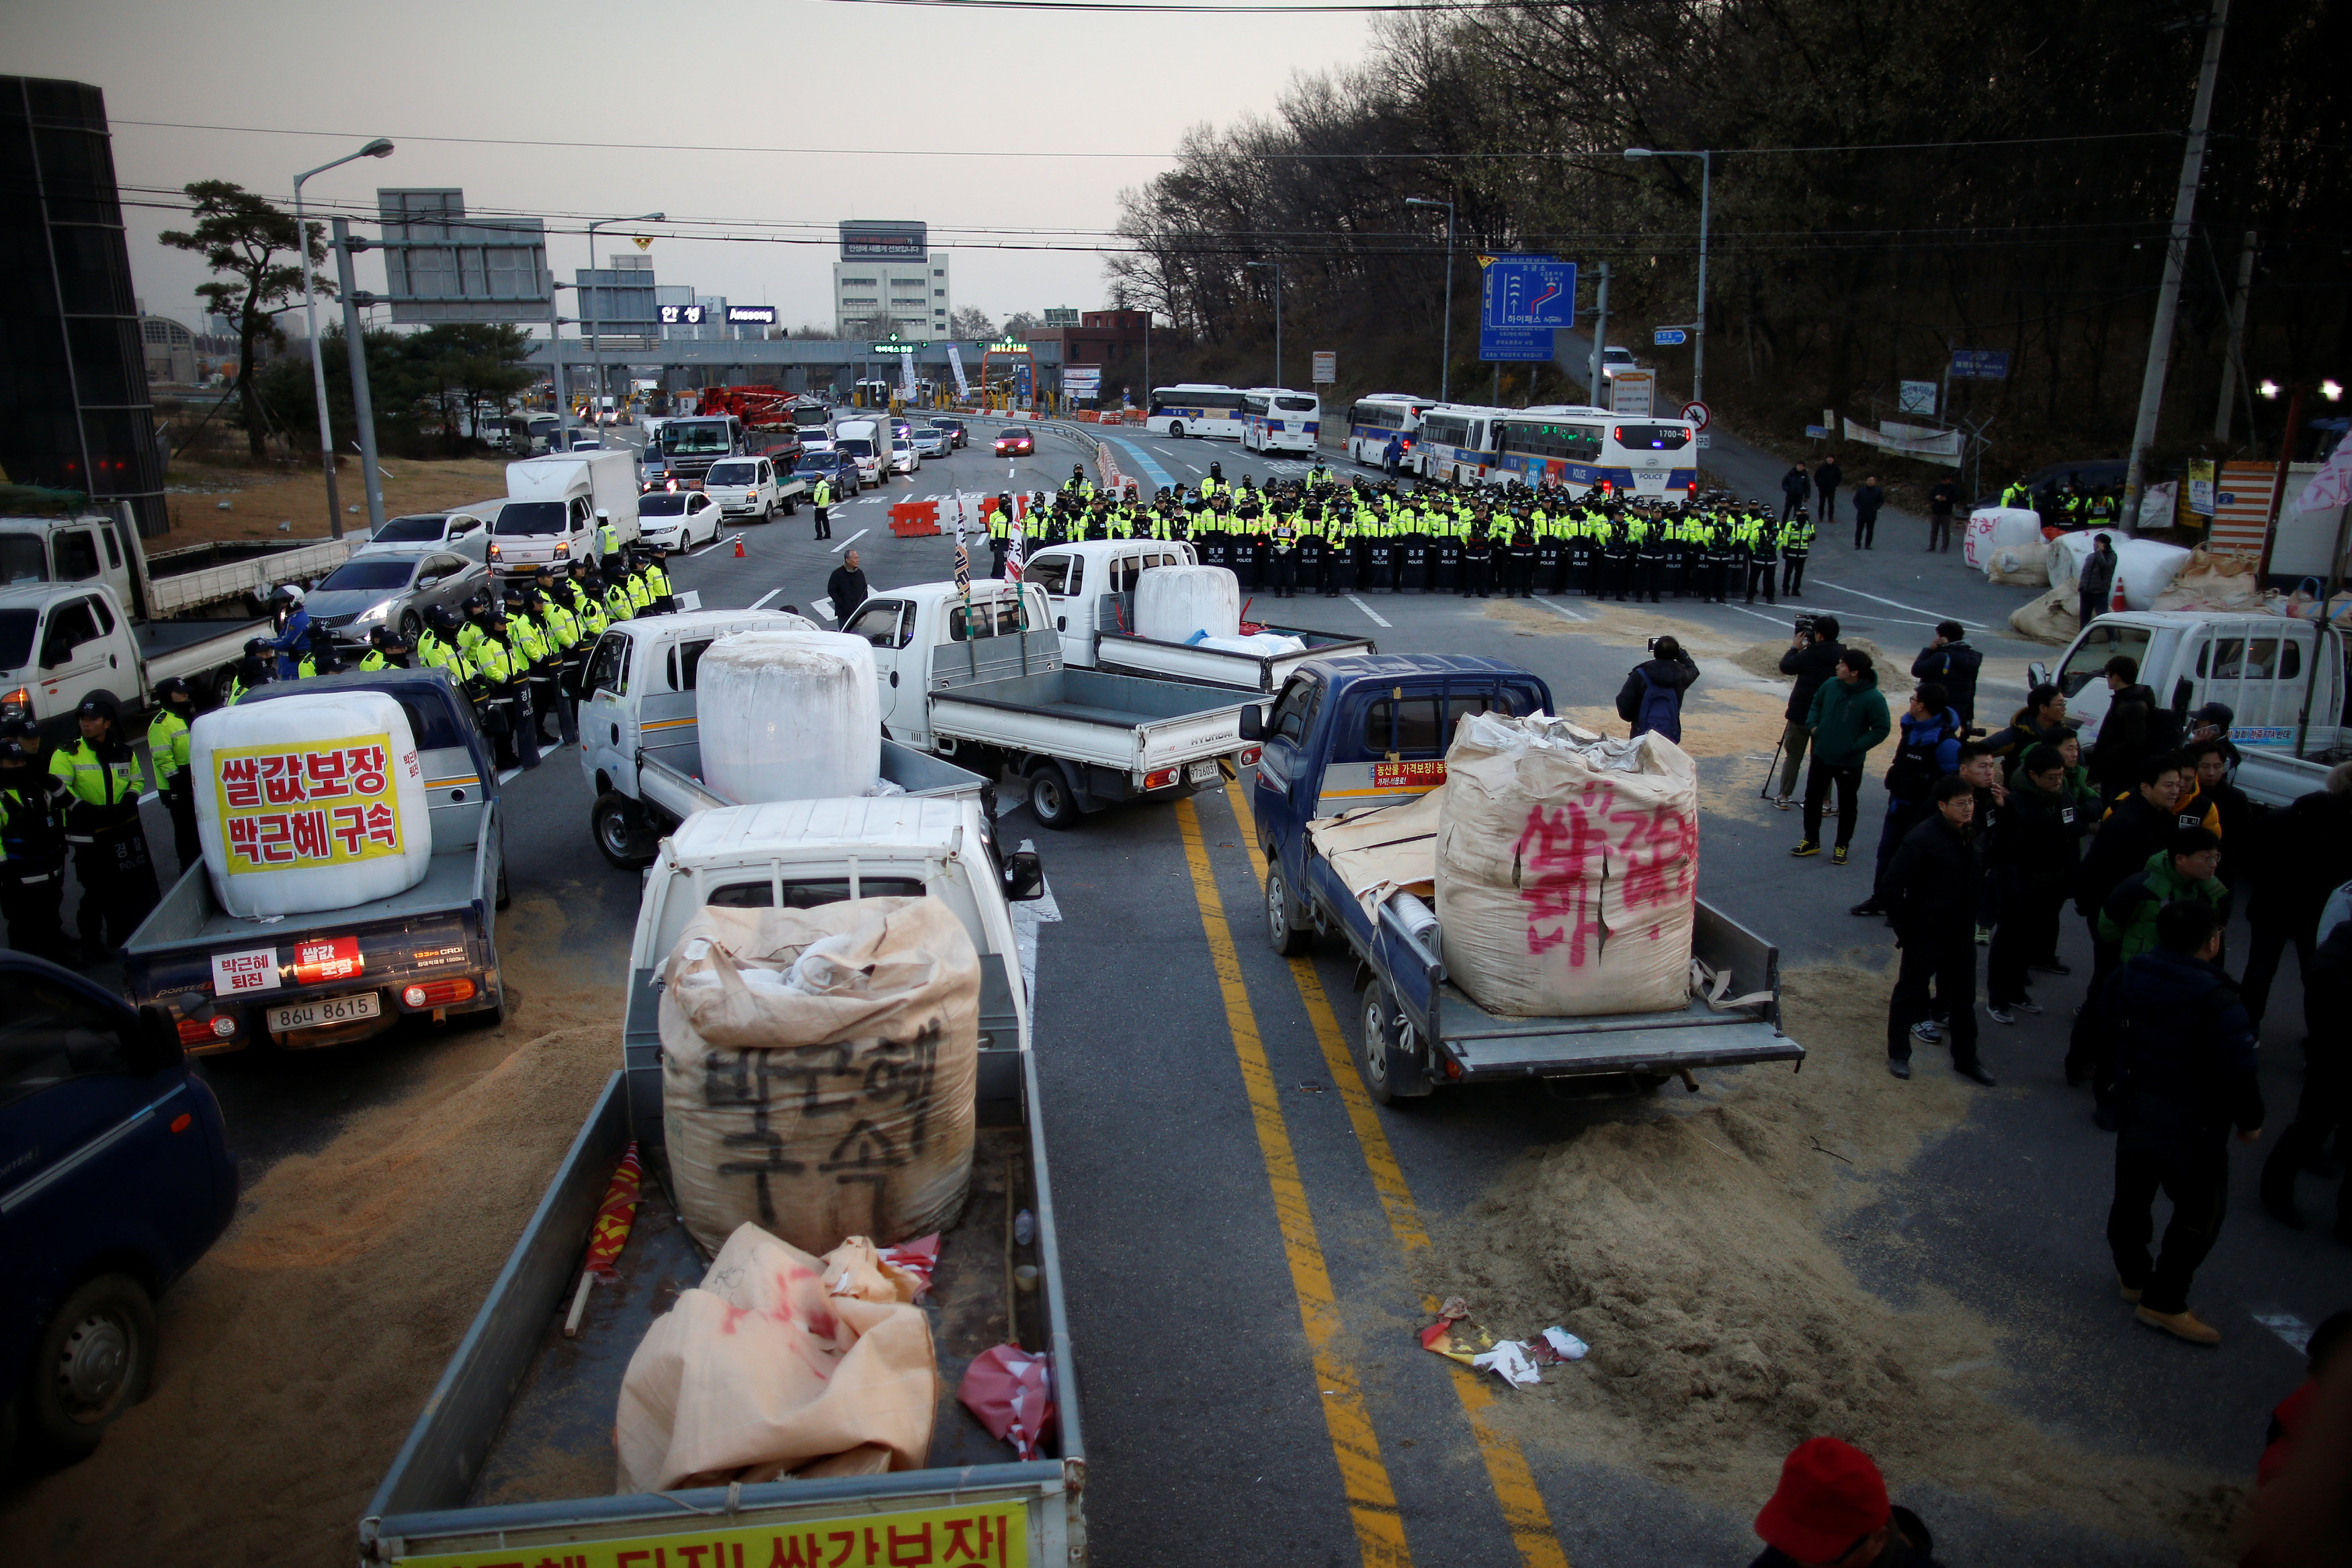 Police block the road as farmers march with their trucks toward Seoul to attend a weekend protest calling for South Korean President Park Geun-hye to step down, at a tollgate in Ansung, South Korea, November 25, 2016. REUTERS/Kim Hong-Jin